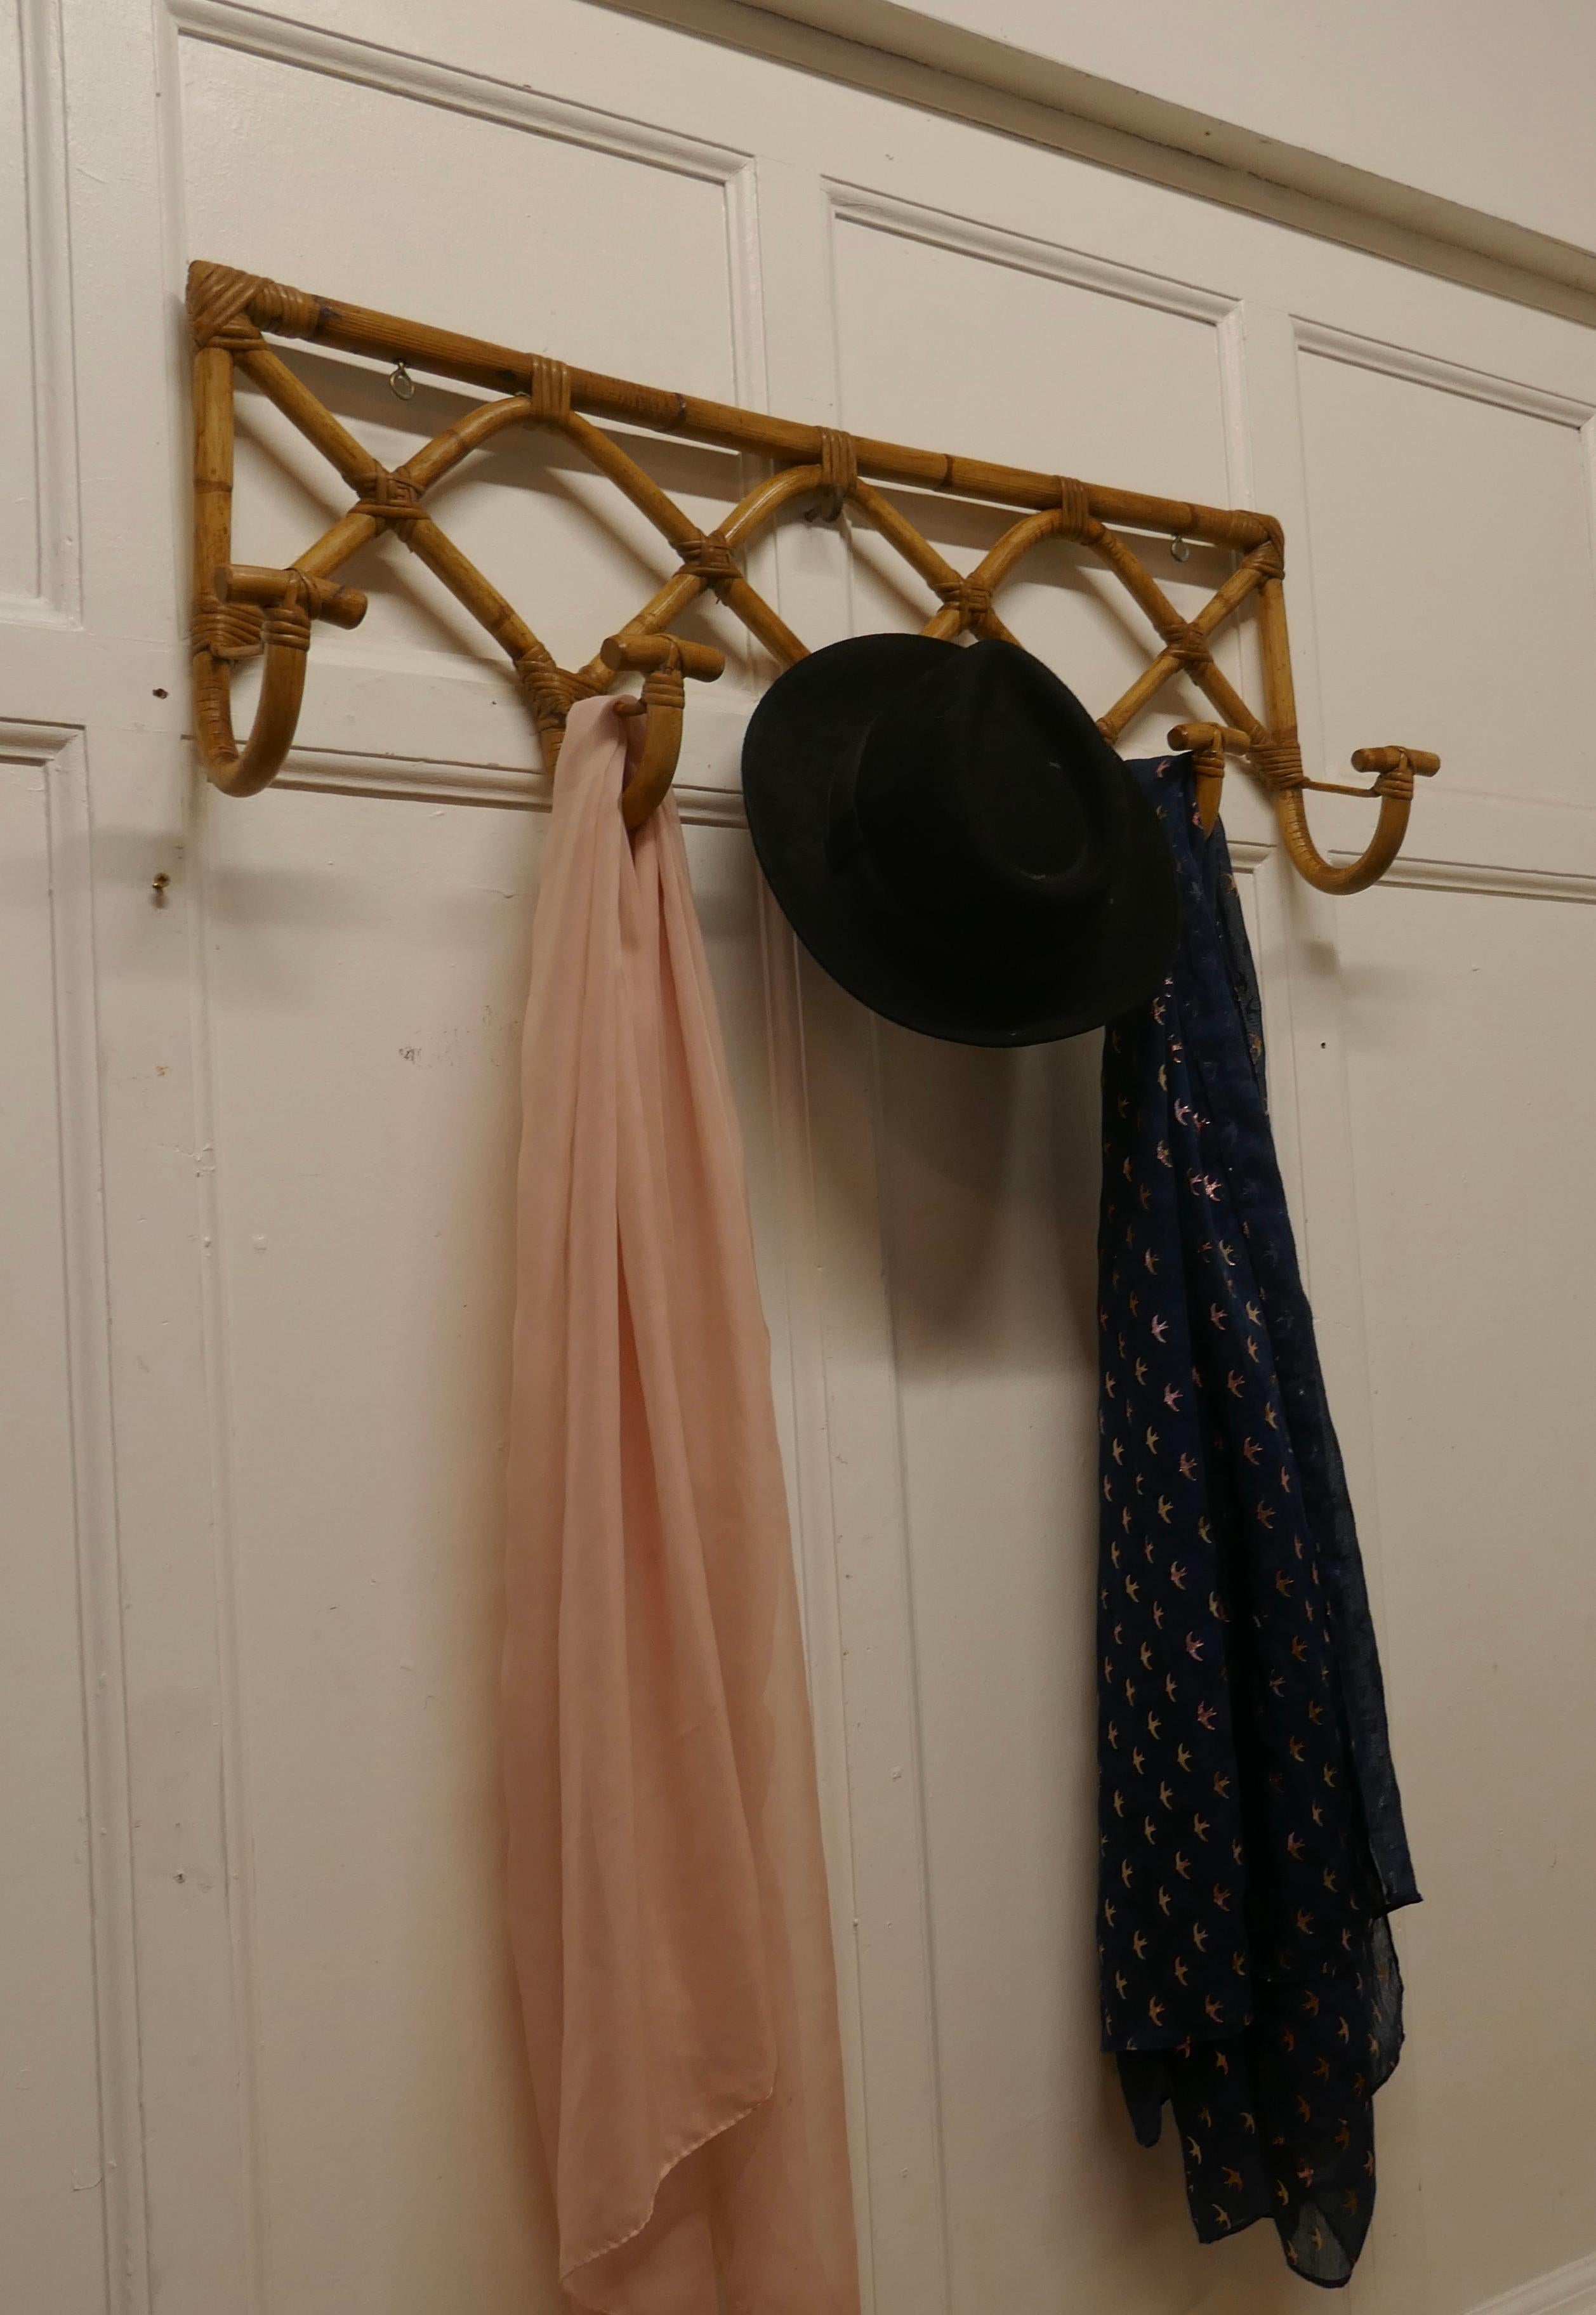 French bent bamboo hat and coat rack

This is an unusual piece it is a wall hanging piece, it has 5 T shaped coat hooks for coats or hats it would make a good hall piece and anywhere where space is limited
This a good looking piece in a Retro